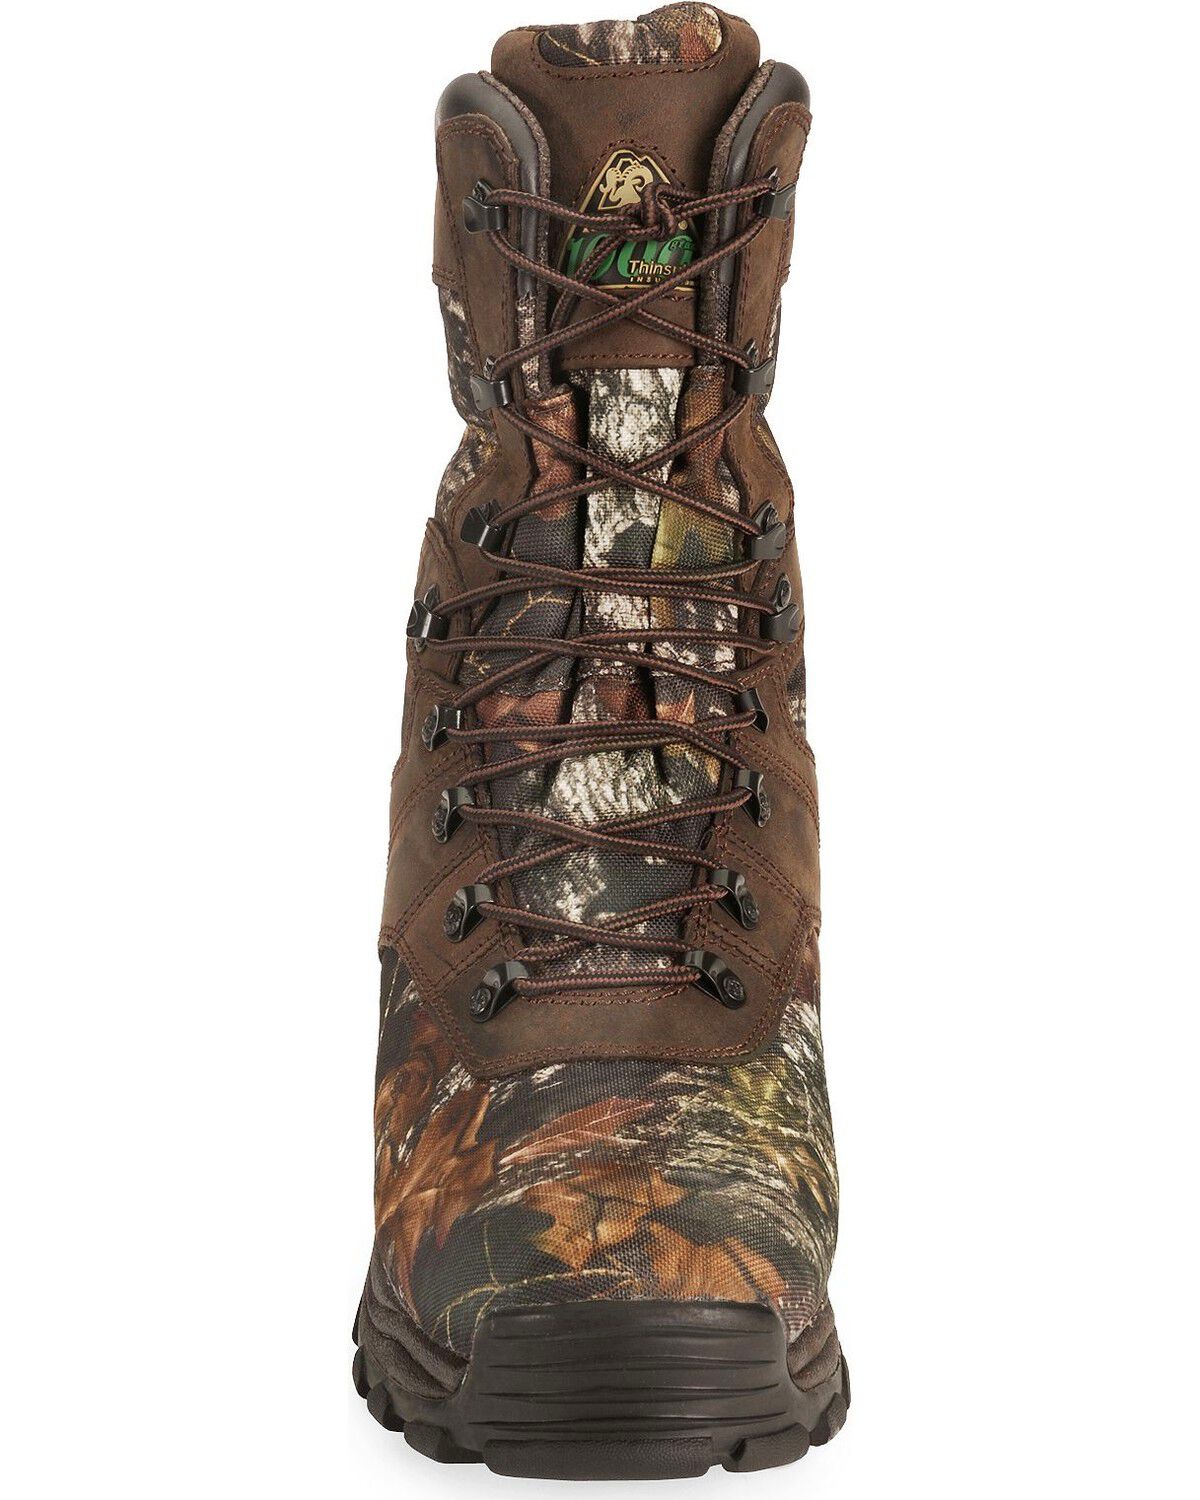 rocky men's sport utility max 1g waterproof hunting boots